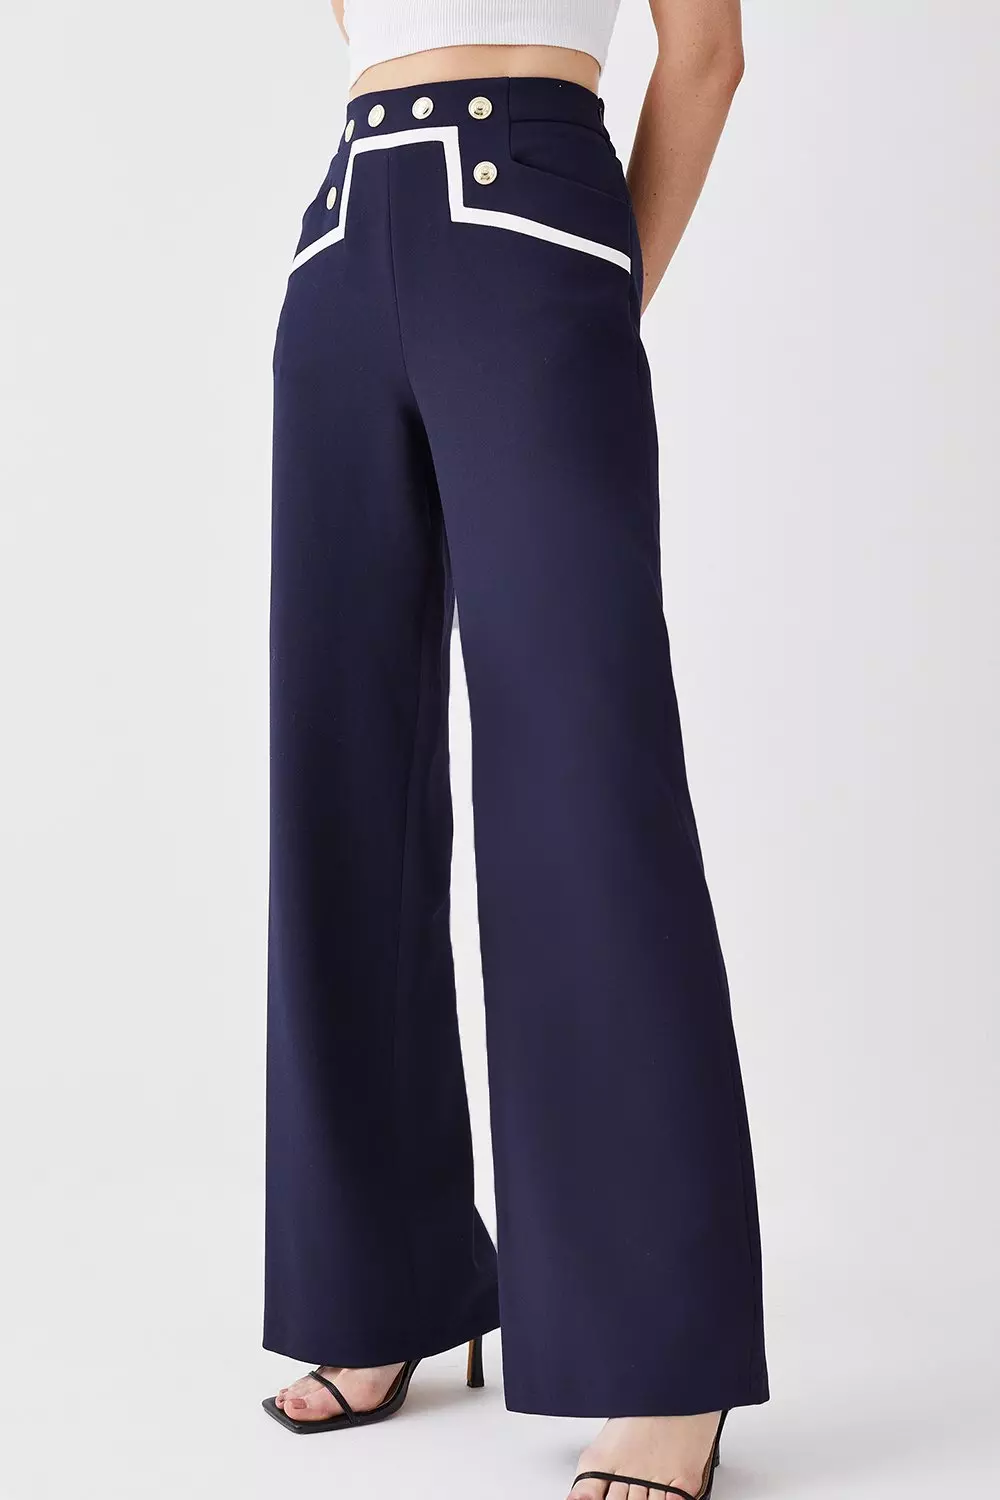 K M by L A N G E Wide leg crossover Button Sharovary pants - NAVY on  Garmentory